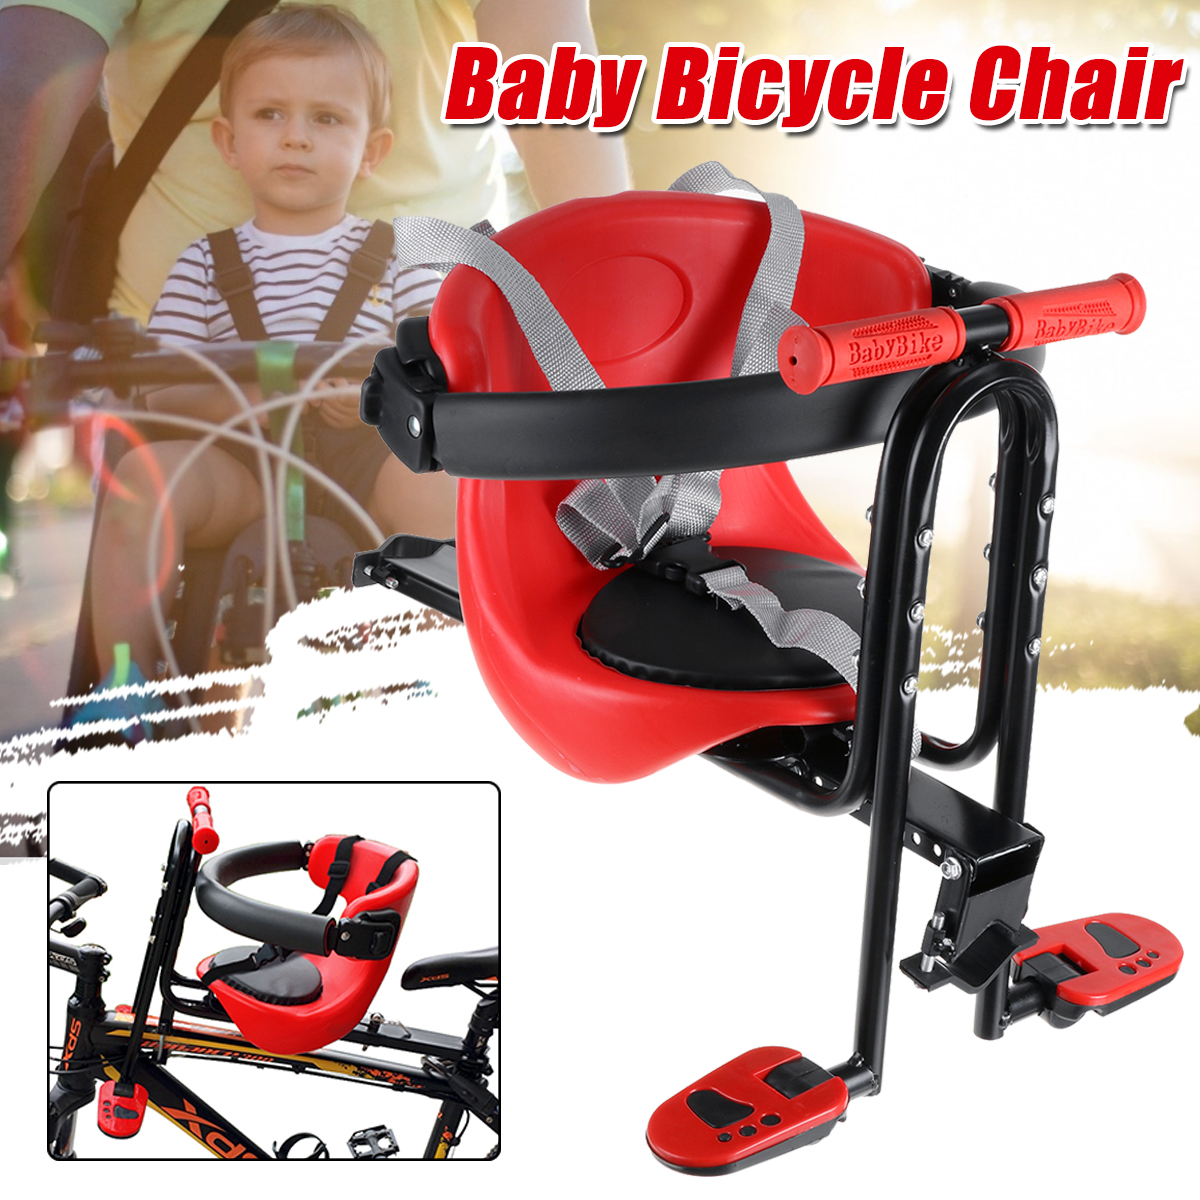 Safety-Child-Bicycle-Seat-Bike-Front-Baby-Carrier-Seat-Kids-Saddle-With-Foot-Pedal-1737434